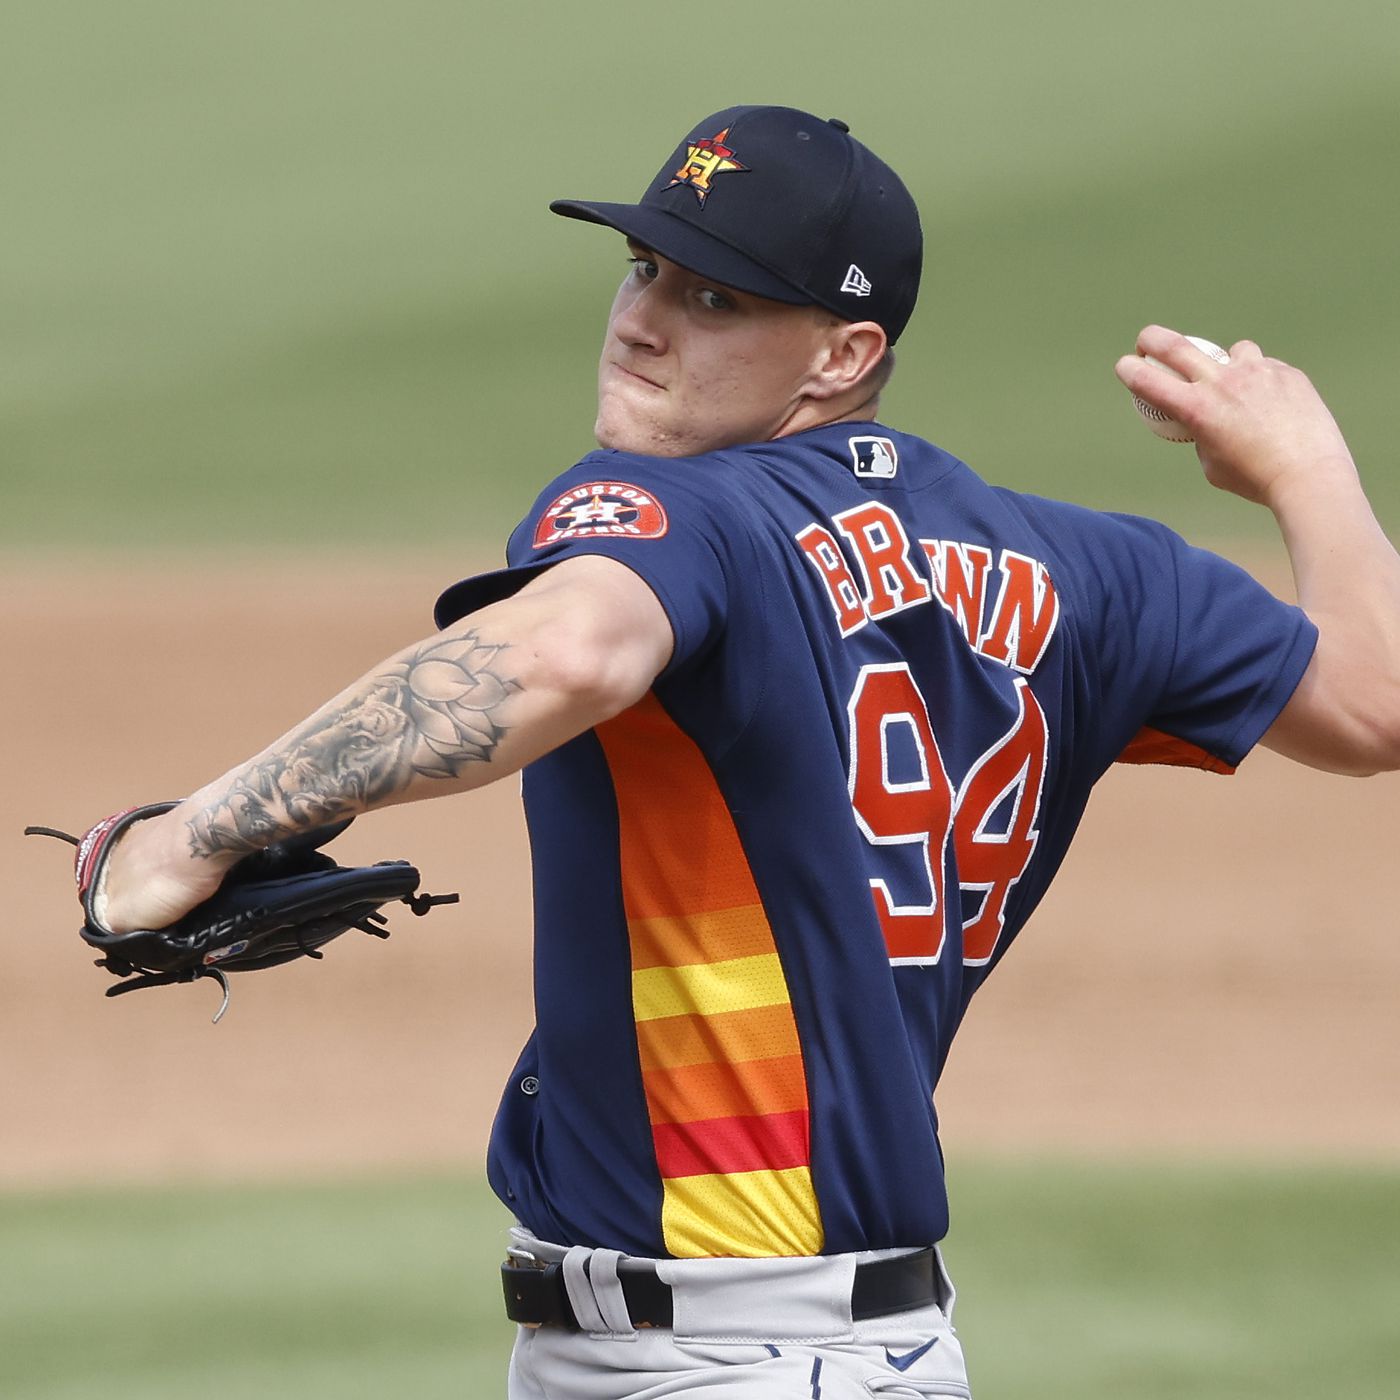 Houston Astros Top Five Pitching Prospects For 2022 - The Crawfish